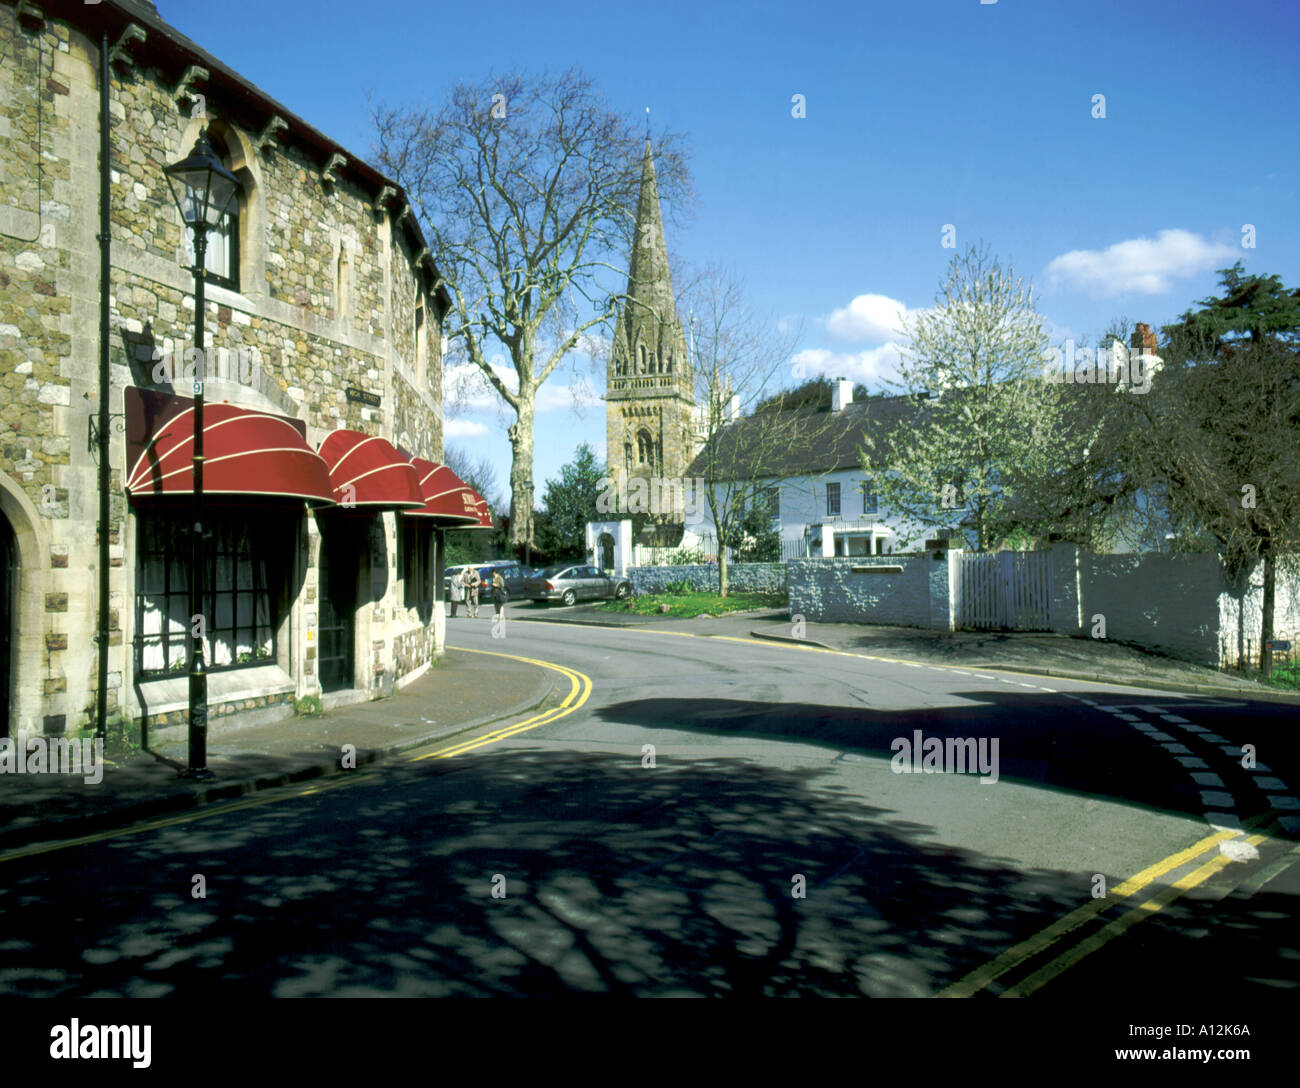 Llandaff Cathedral and high street, Cardiff, South Wales, UK. Stock Photo